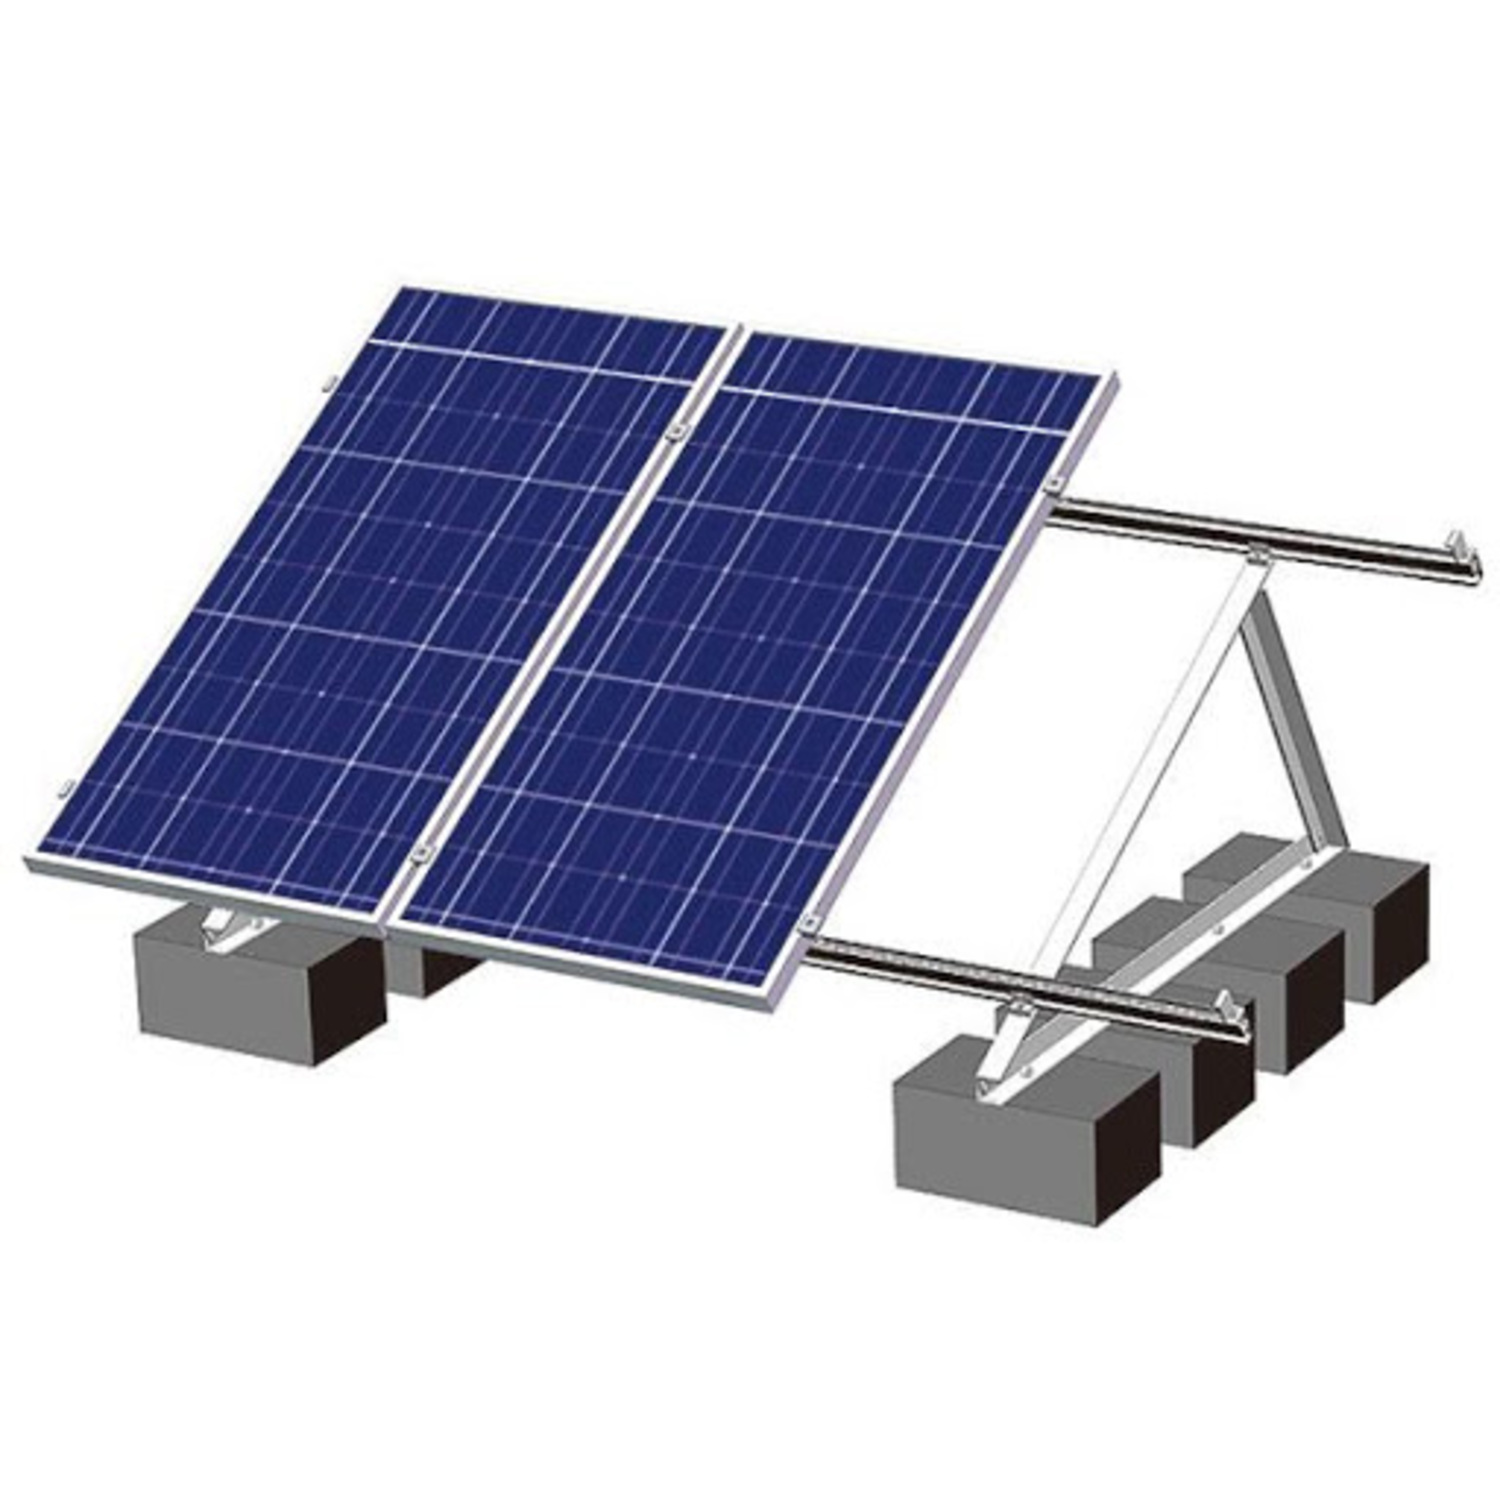 mounting a solar panel to a roof rack